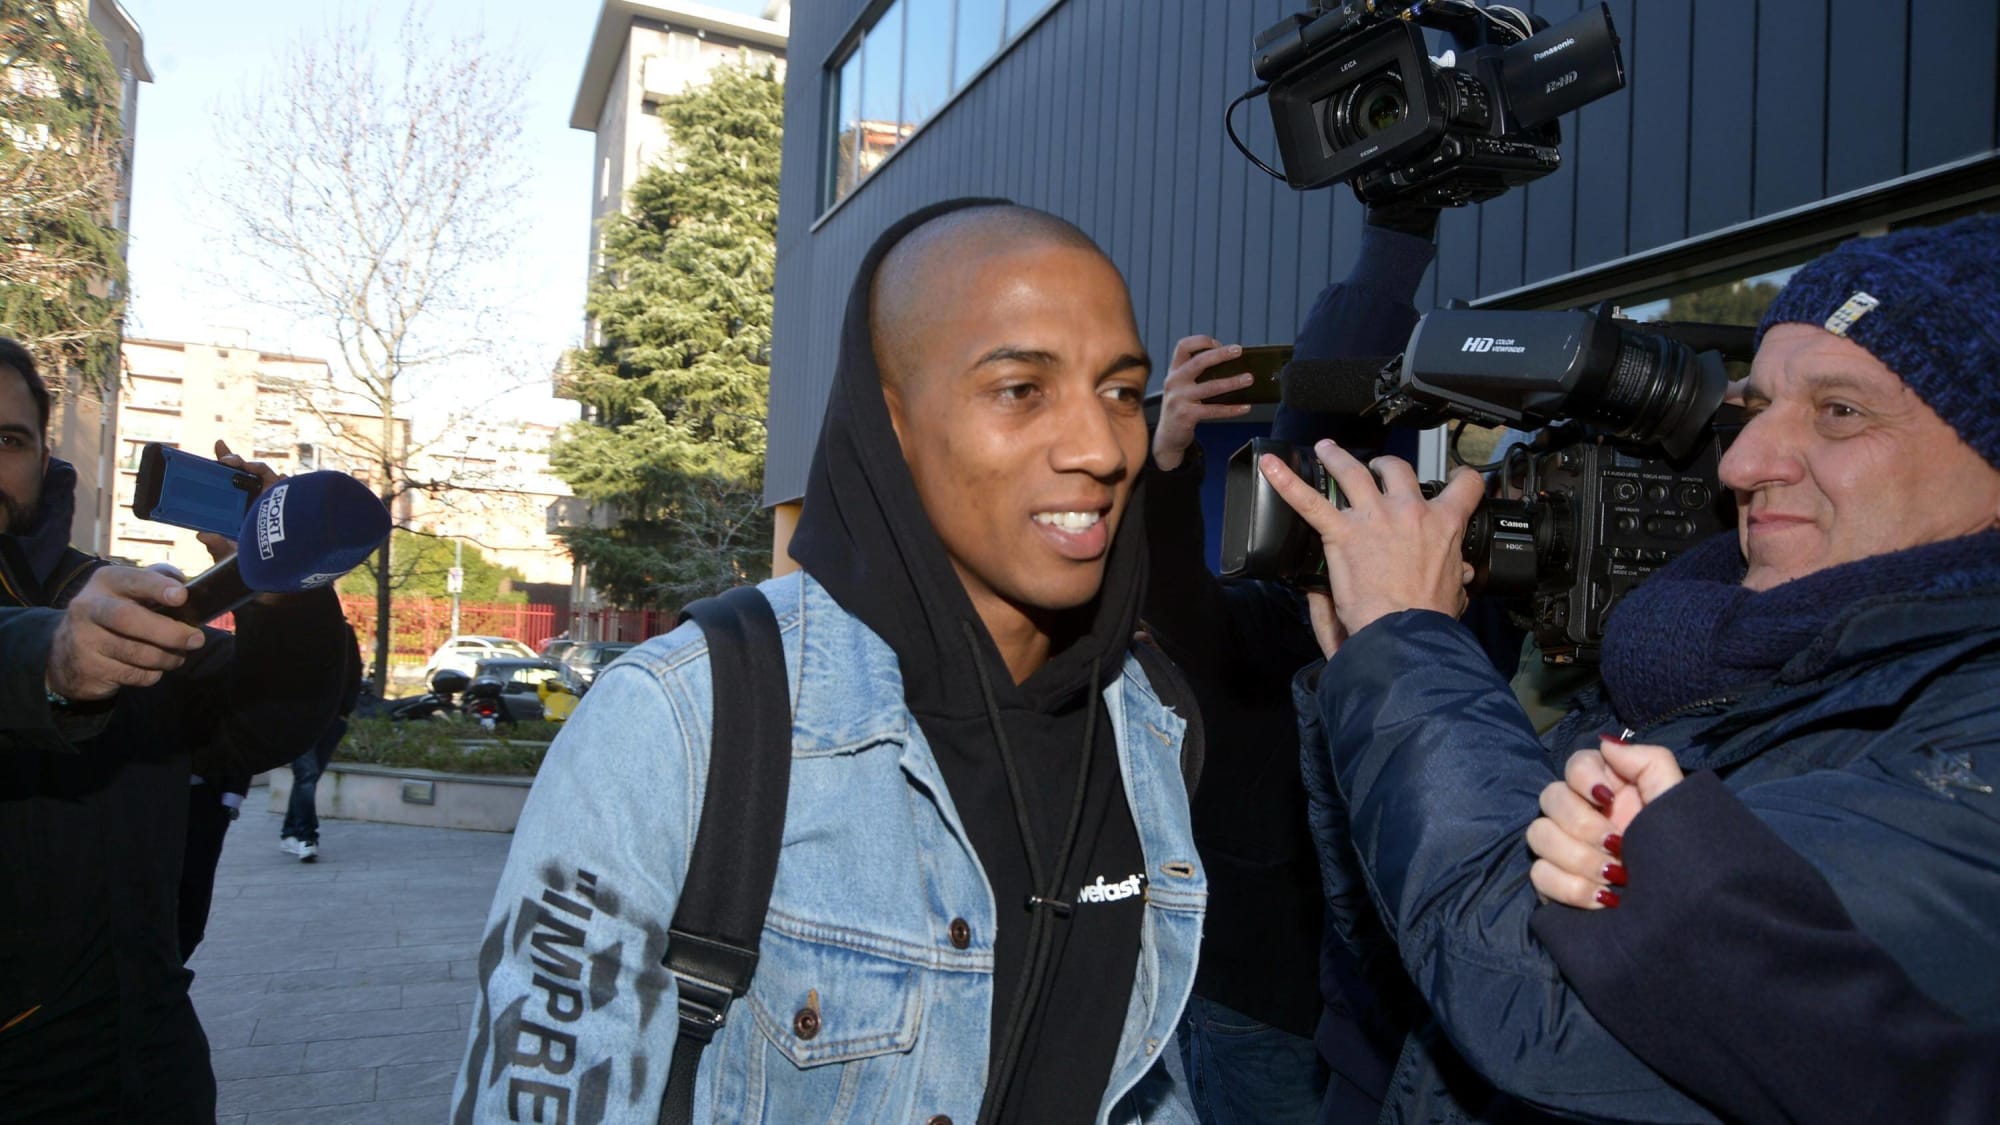 Ashley Young 